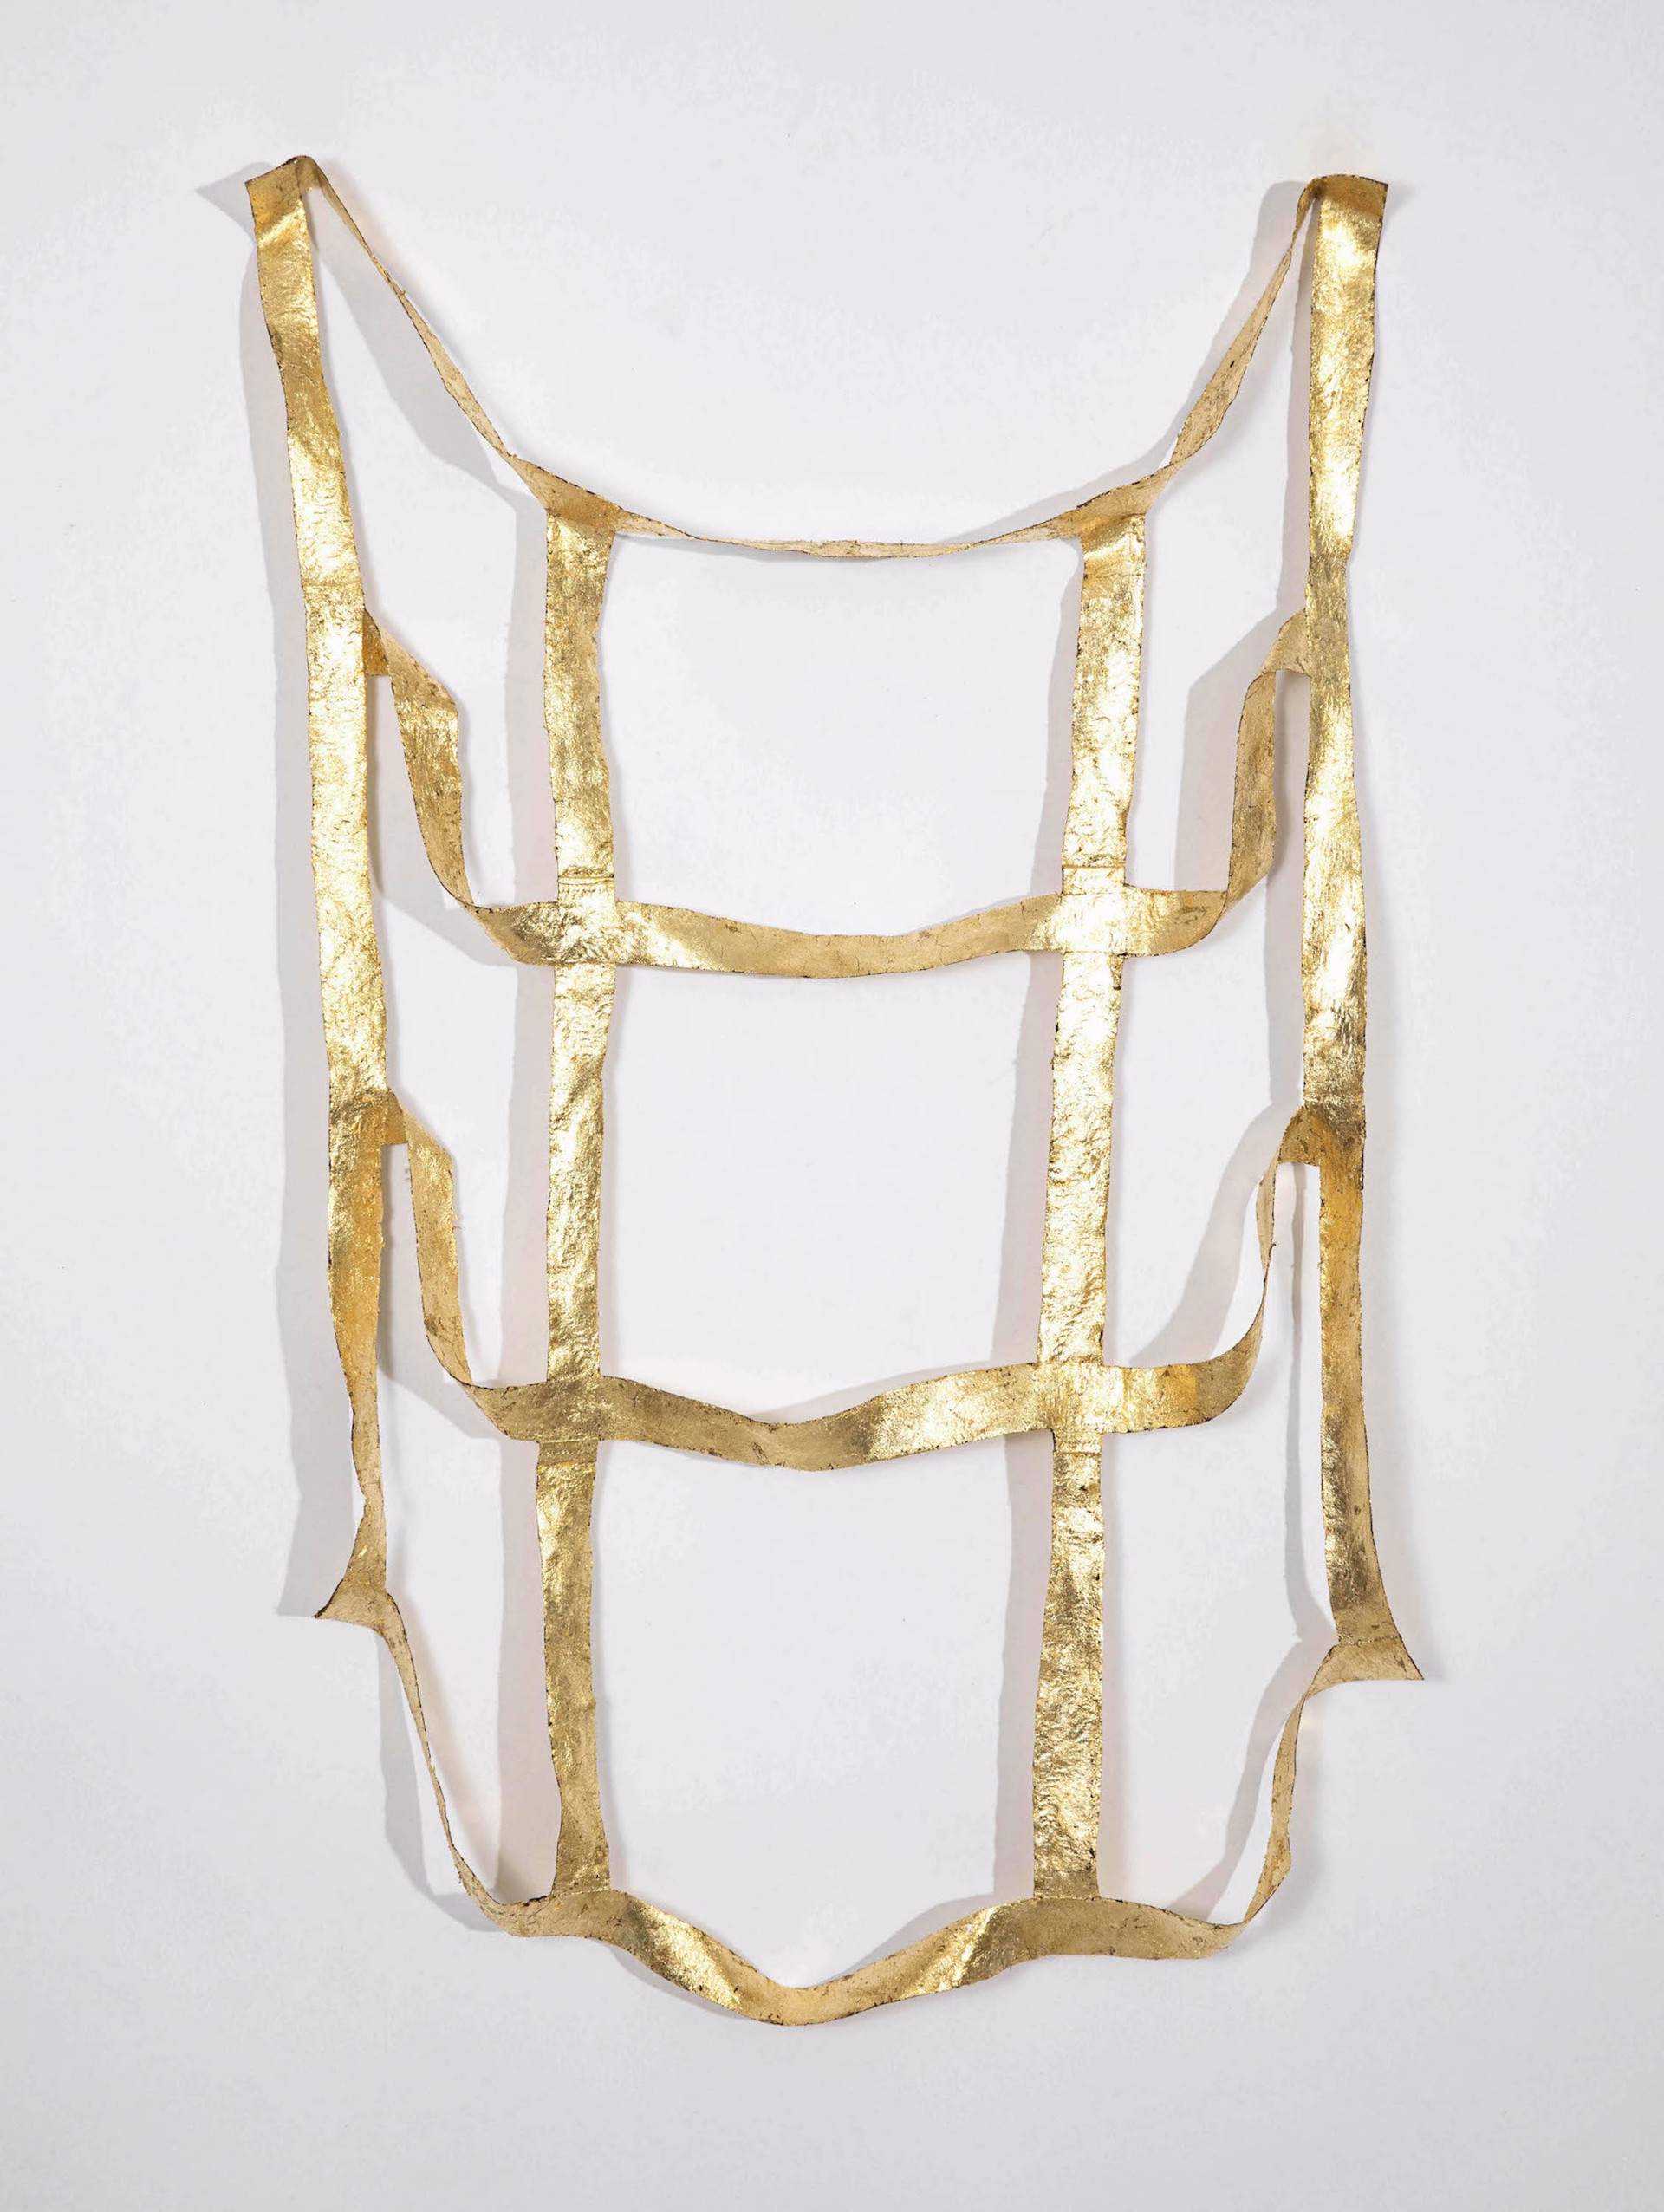 Camisole by Vadis Turner